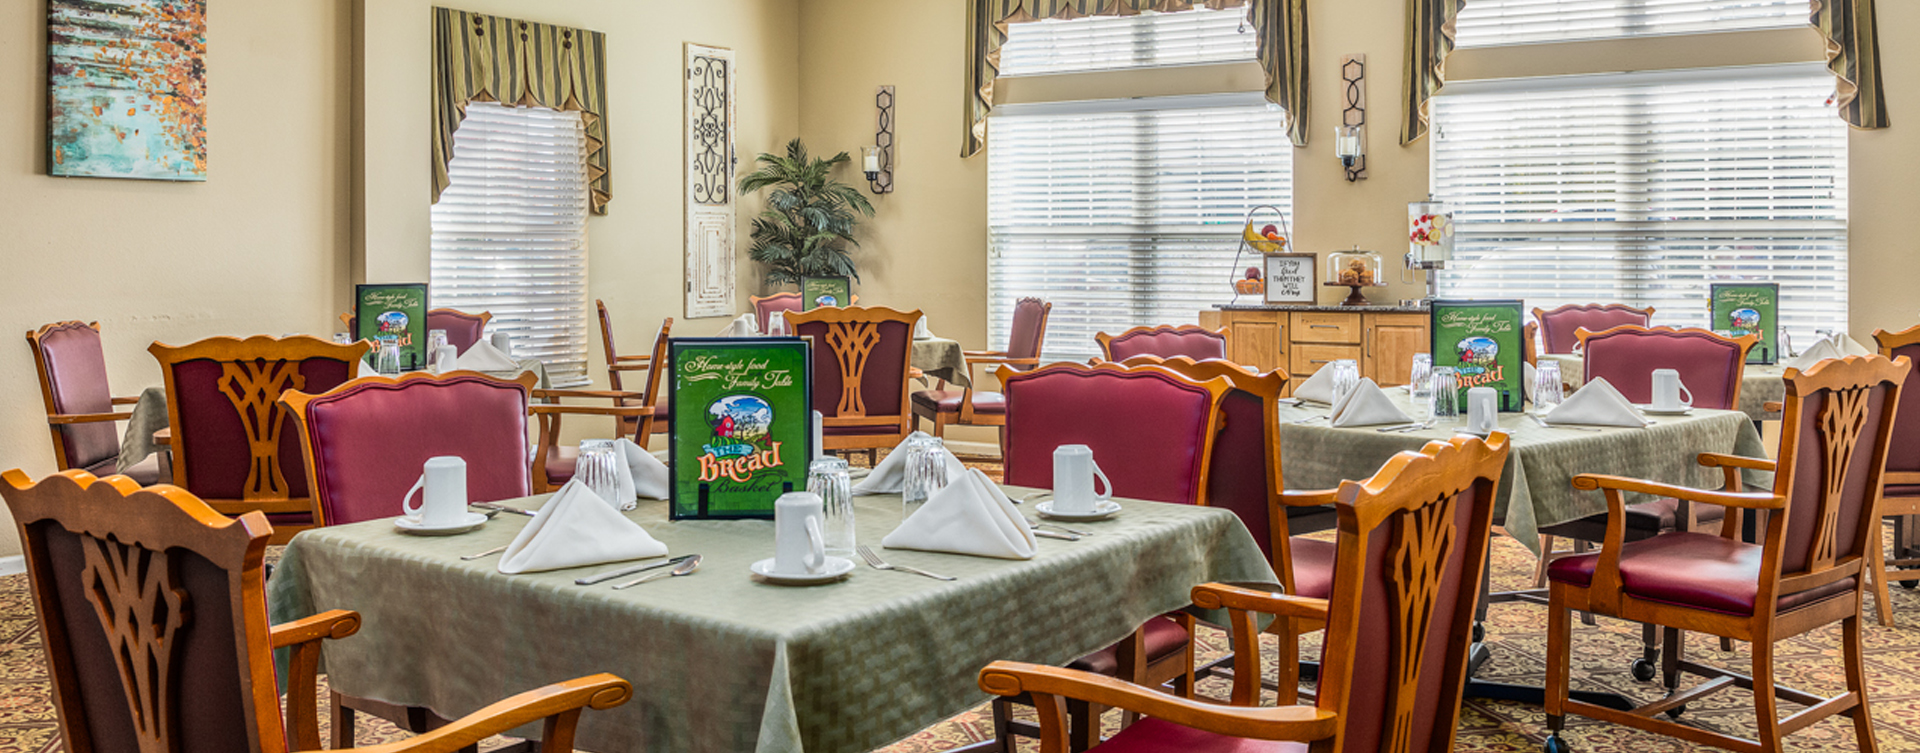 Food is best when shared with friends in the dining room at Bickford of Fort Dodge